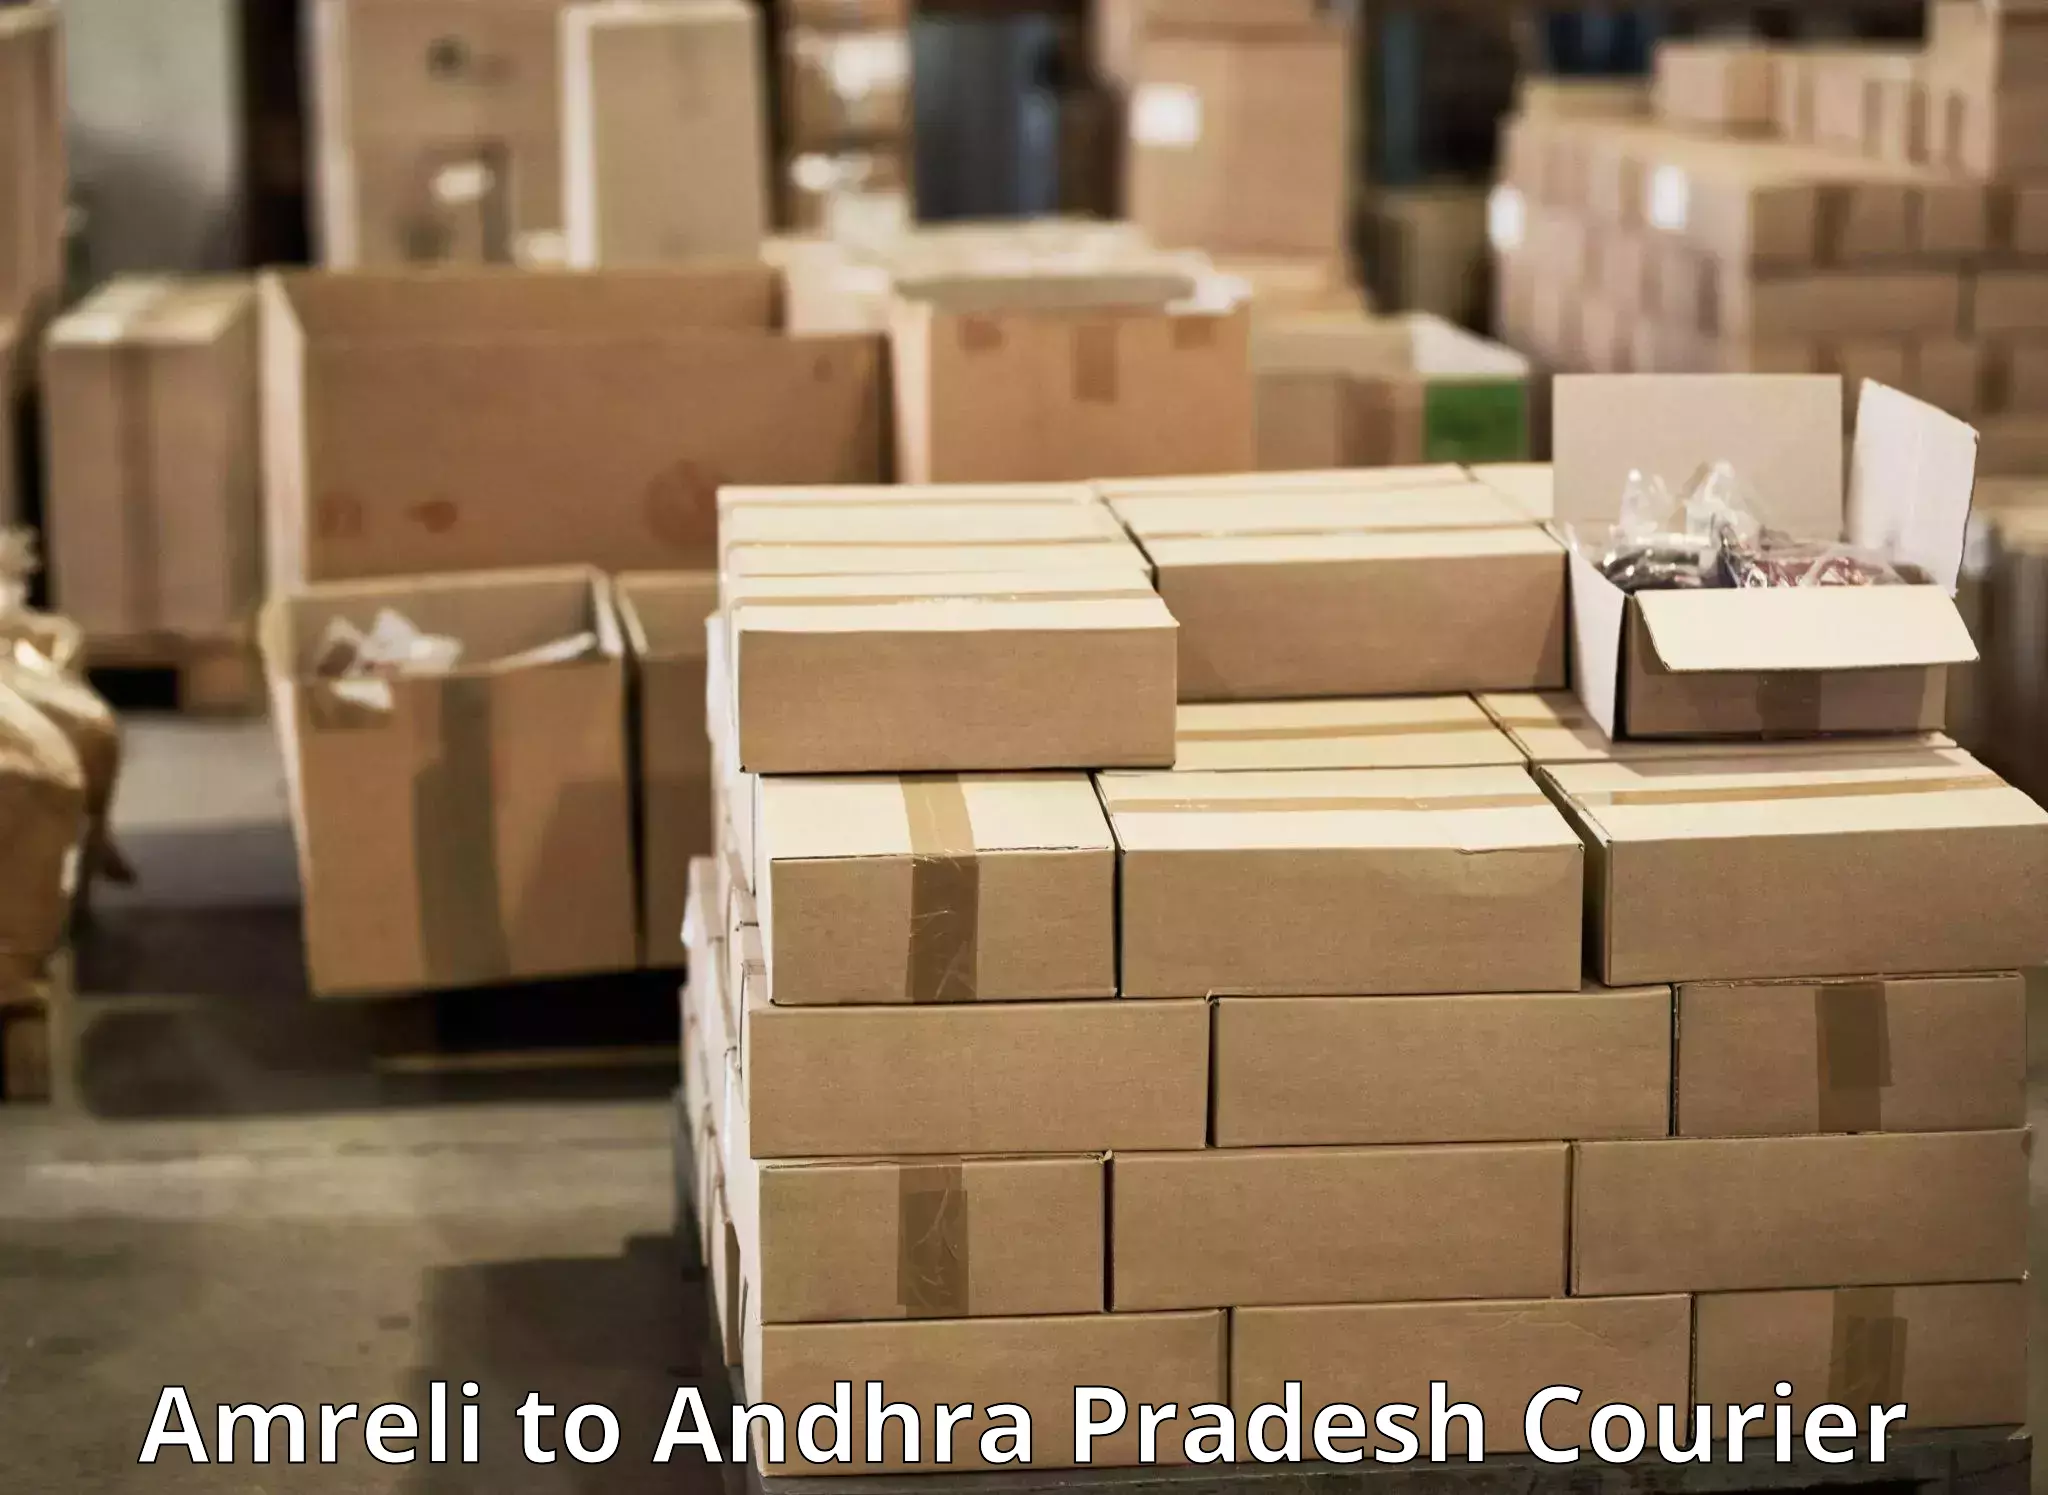 Ocean freight courier in Amreli to Gampalagudem